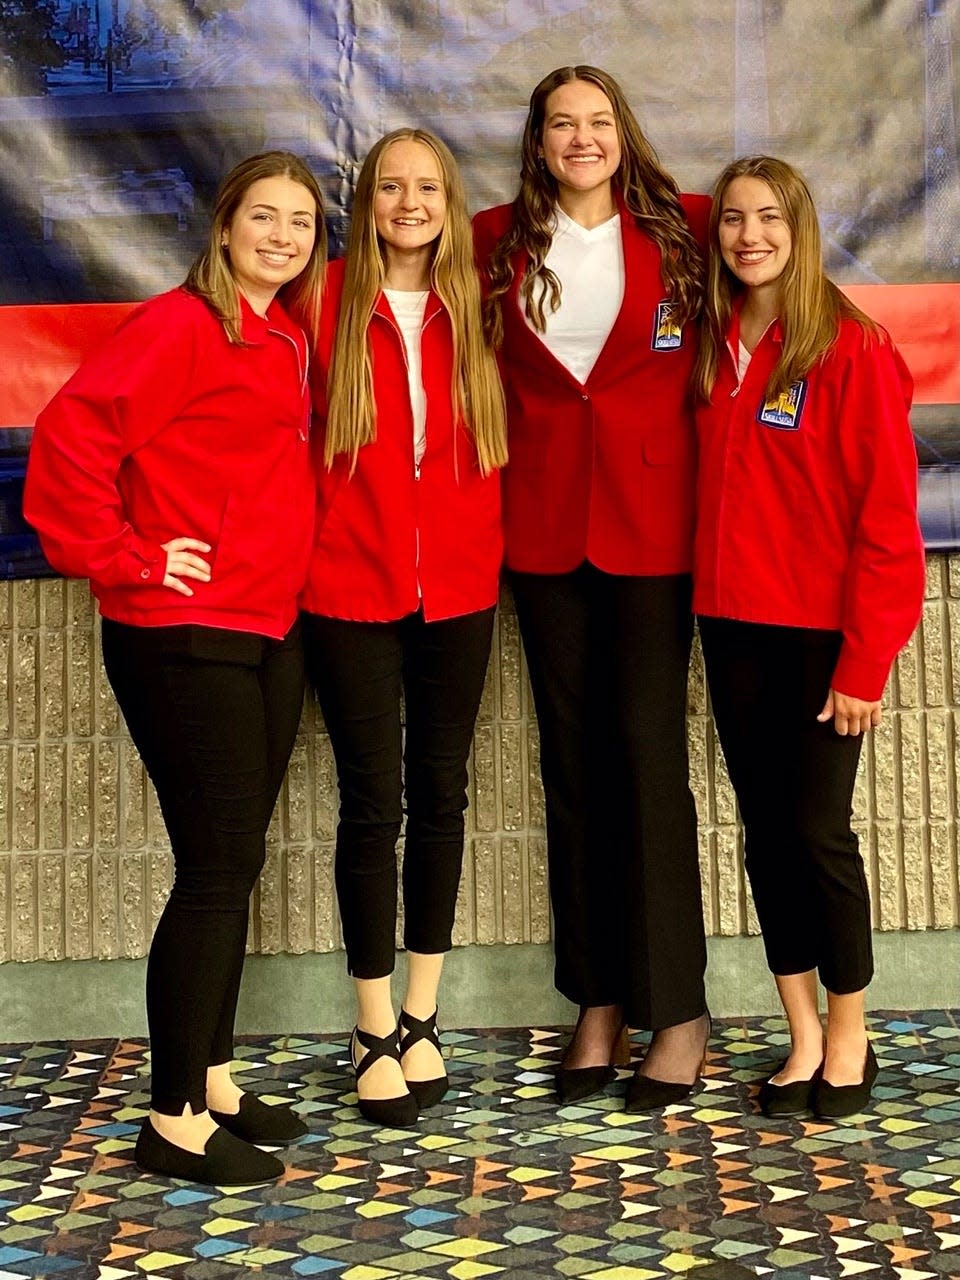 Four students from the Lake Area Career and Technology Center in Devils Lake recently competed in the 58th Annual National SkillsUSA Championships held in Atlanta, Georgia (June 20-24). Left to right: Bridgette Harkness, Rebekah Widmer, Mattyson Ertelt, Haley Duncan.